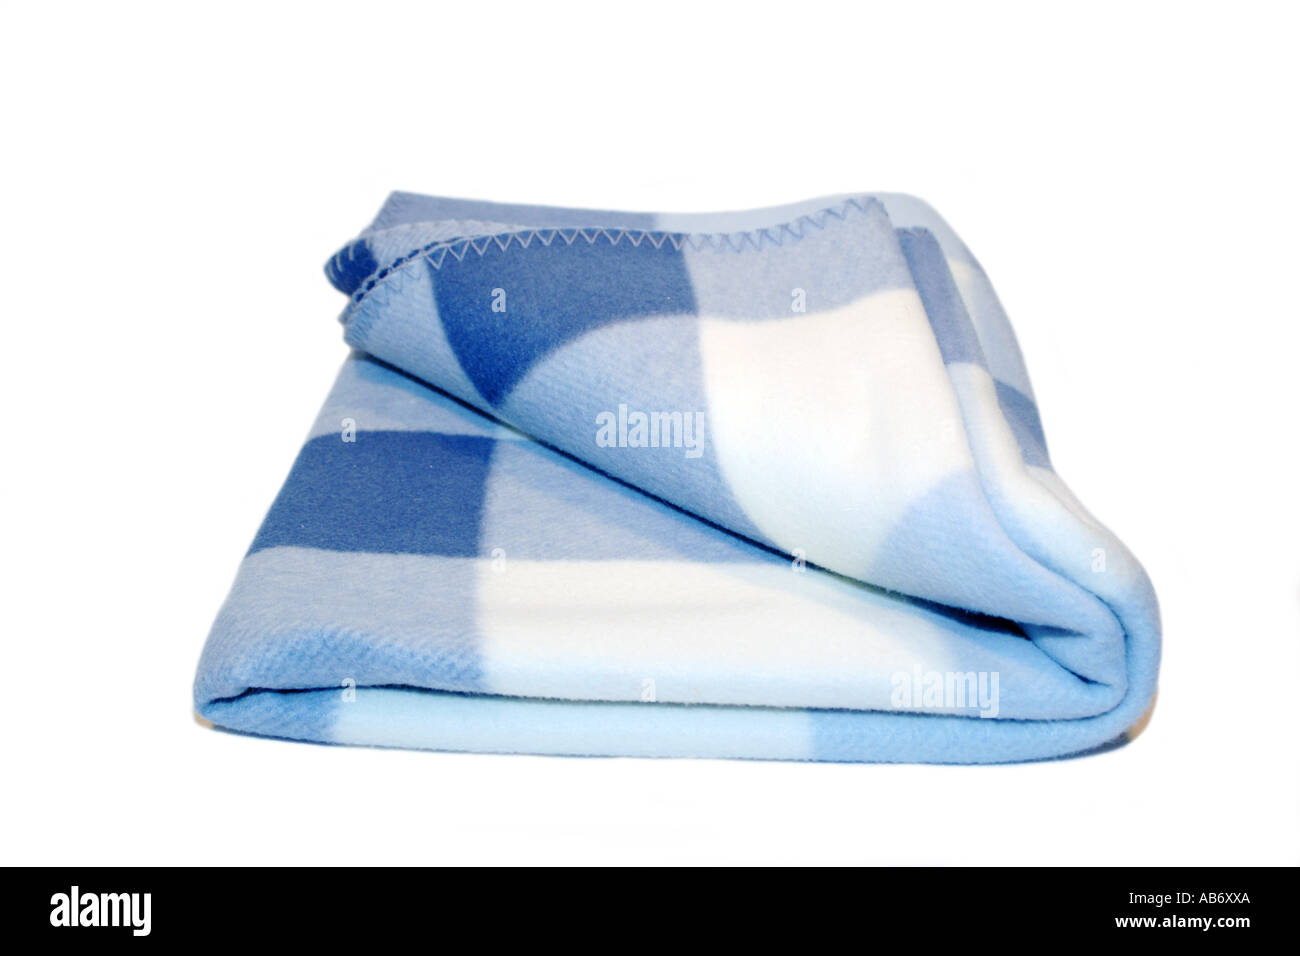 A Soft blue check patterned Blanket. Stock Photo